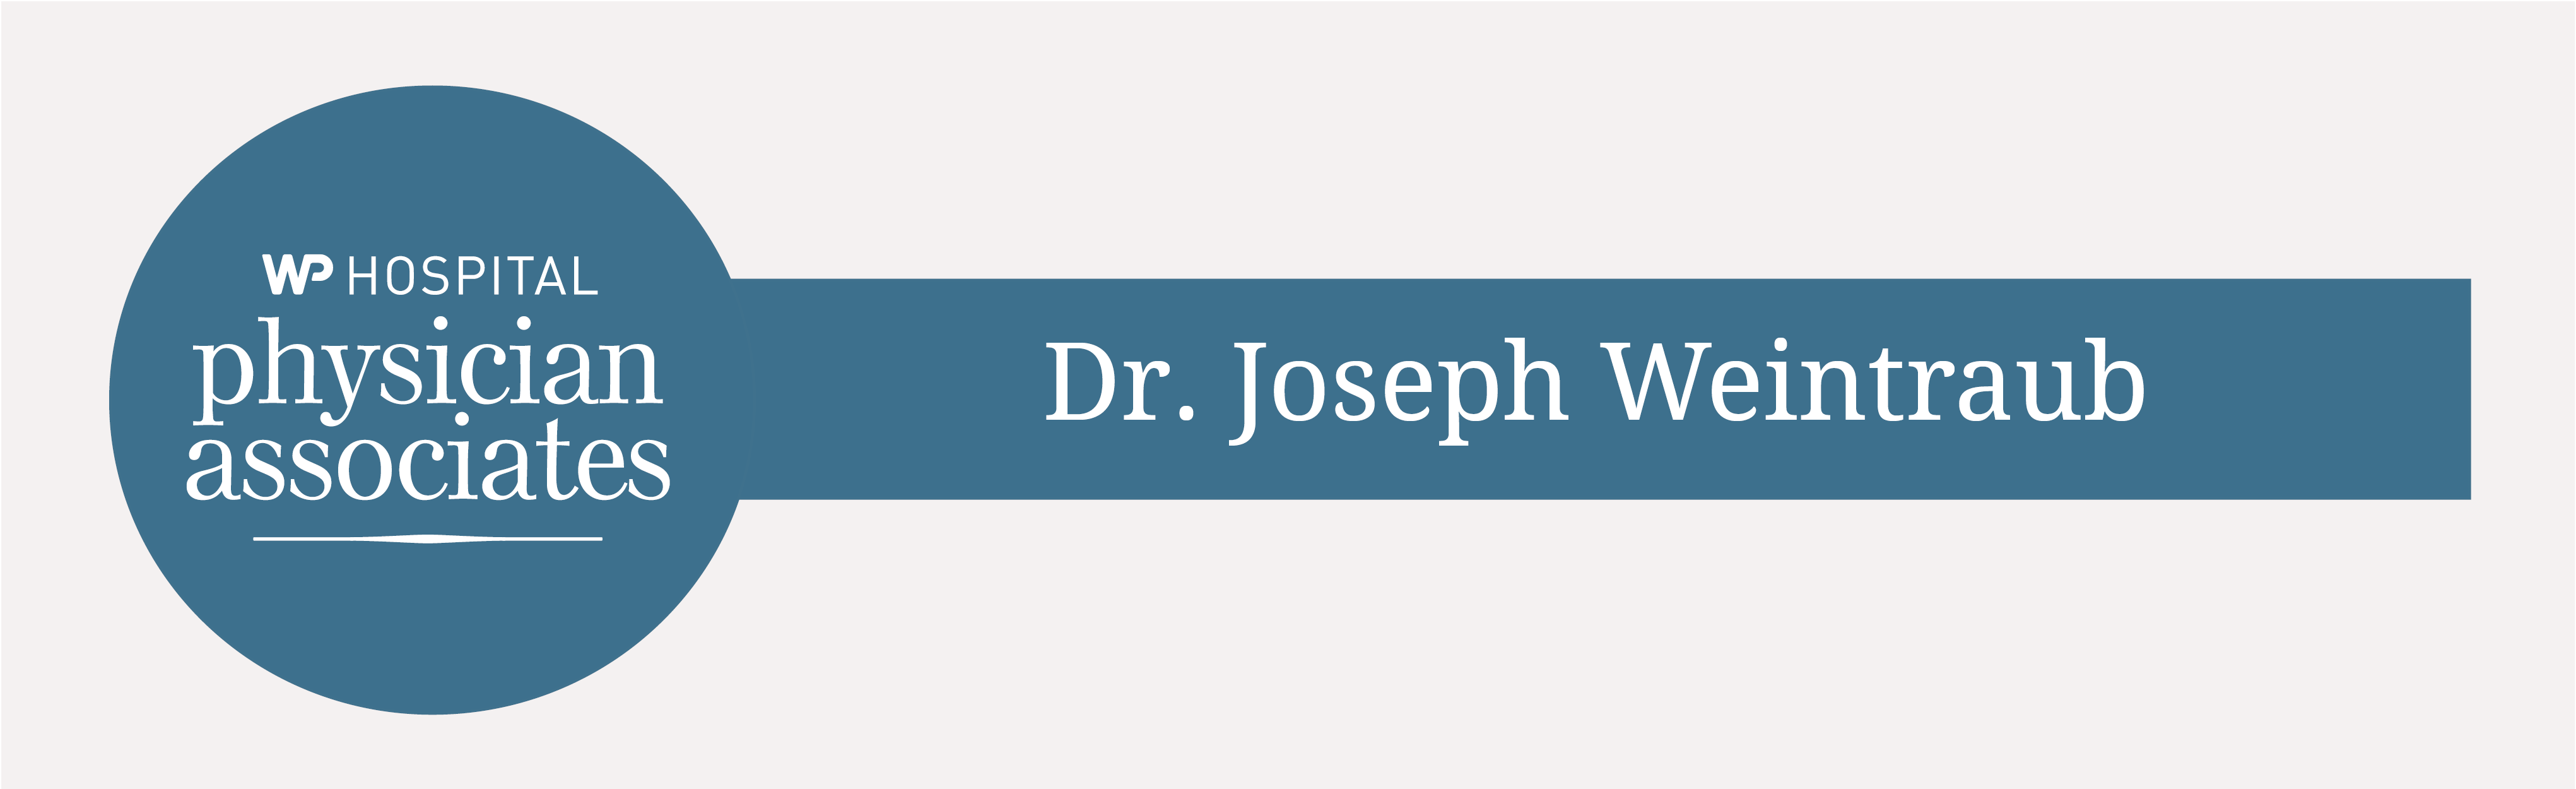 Scarsdale Medical Group Welcomes Dr. Joseph Weintraub